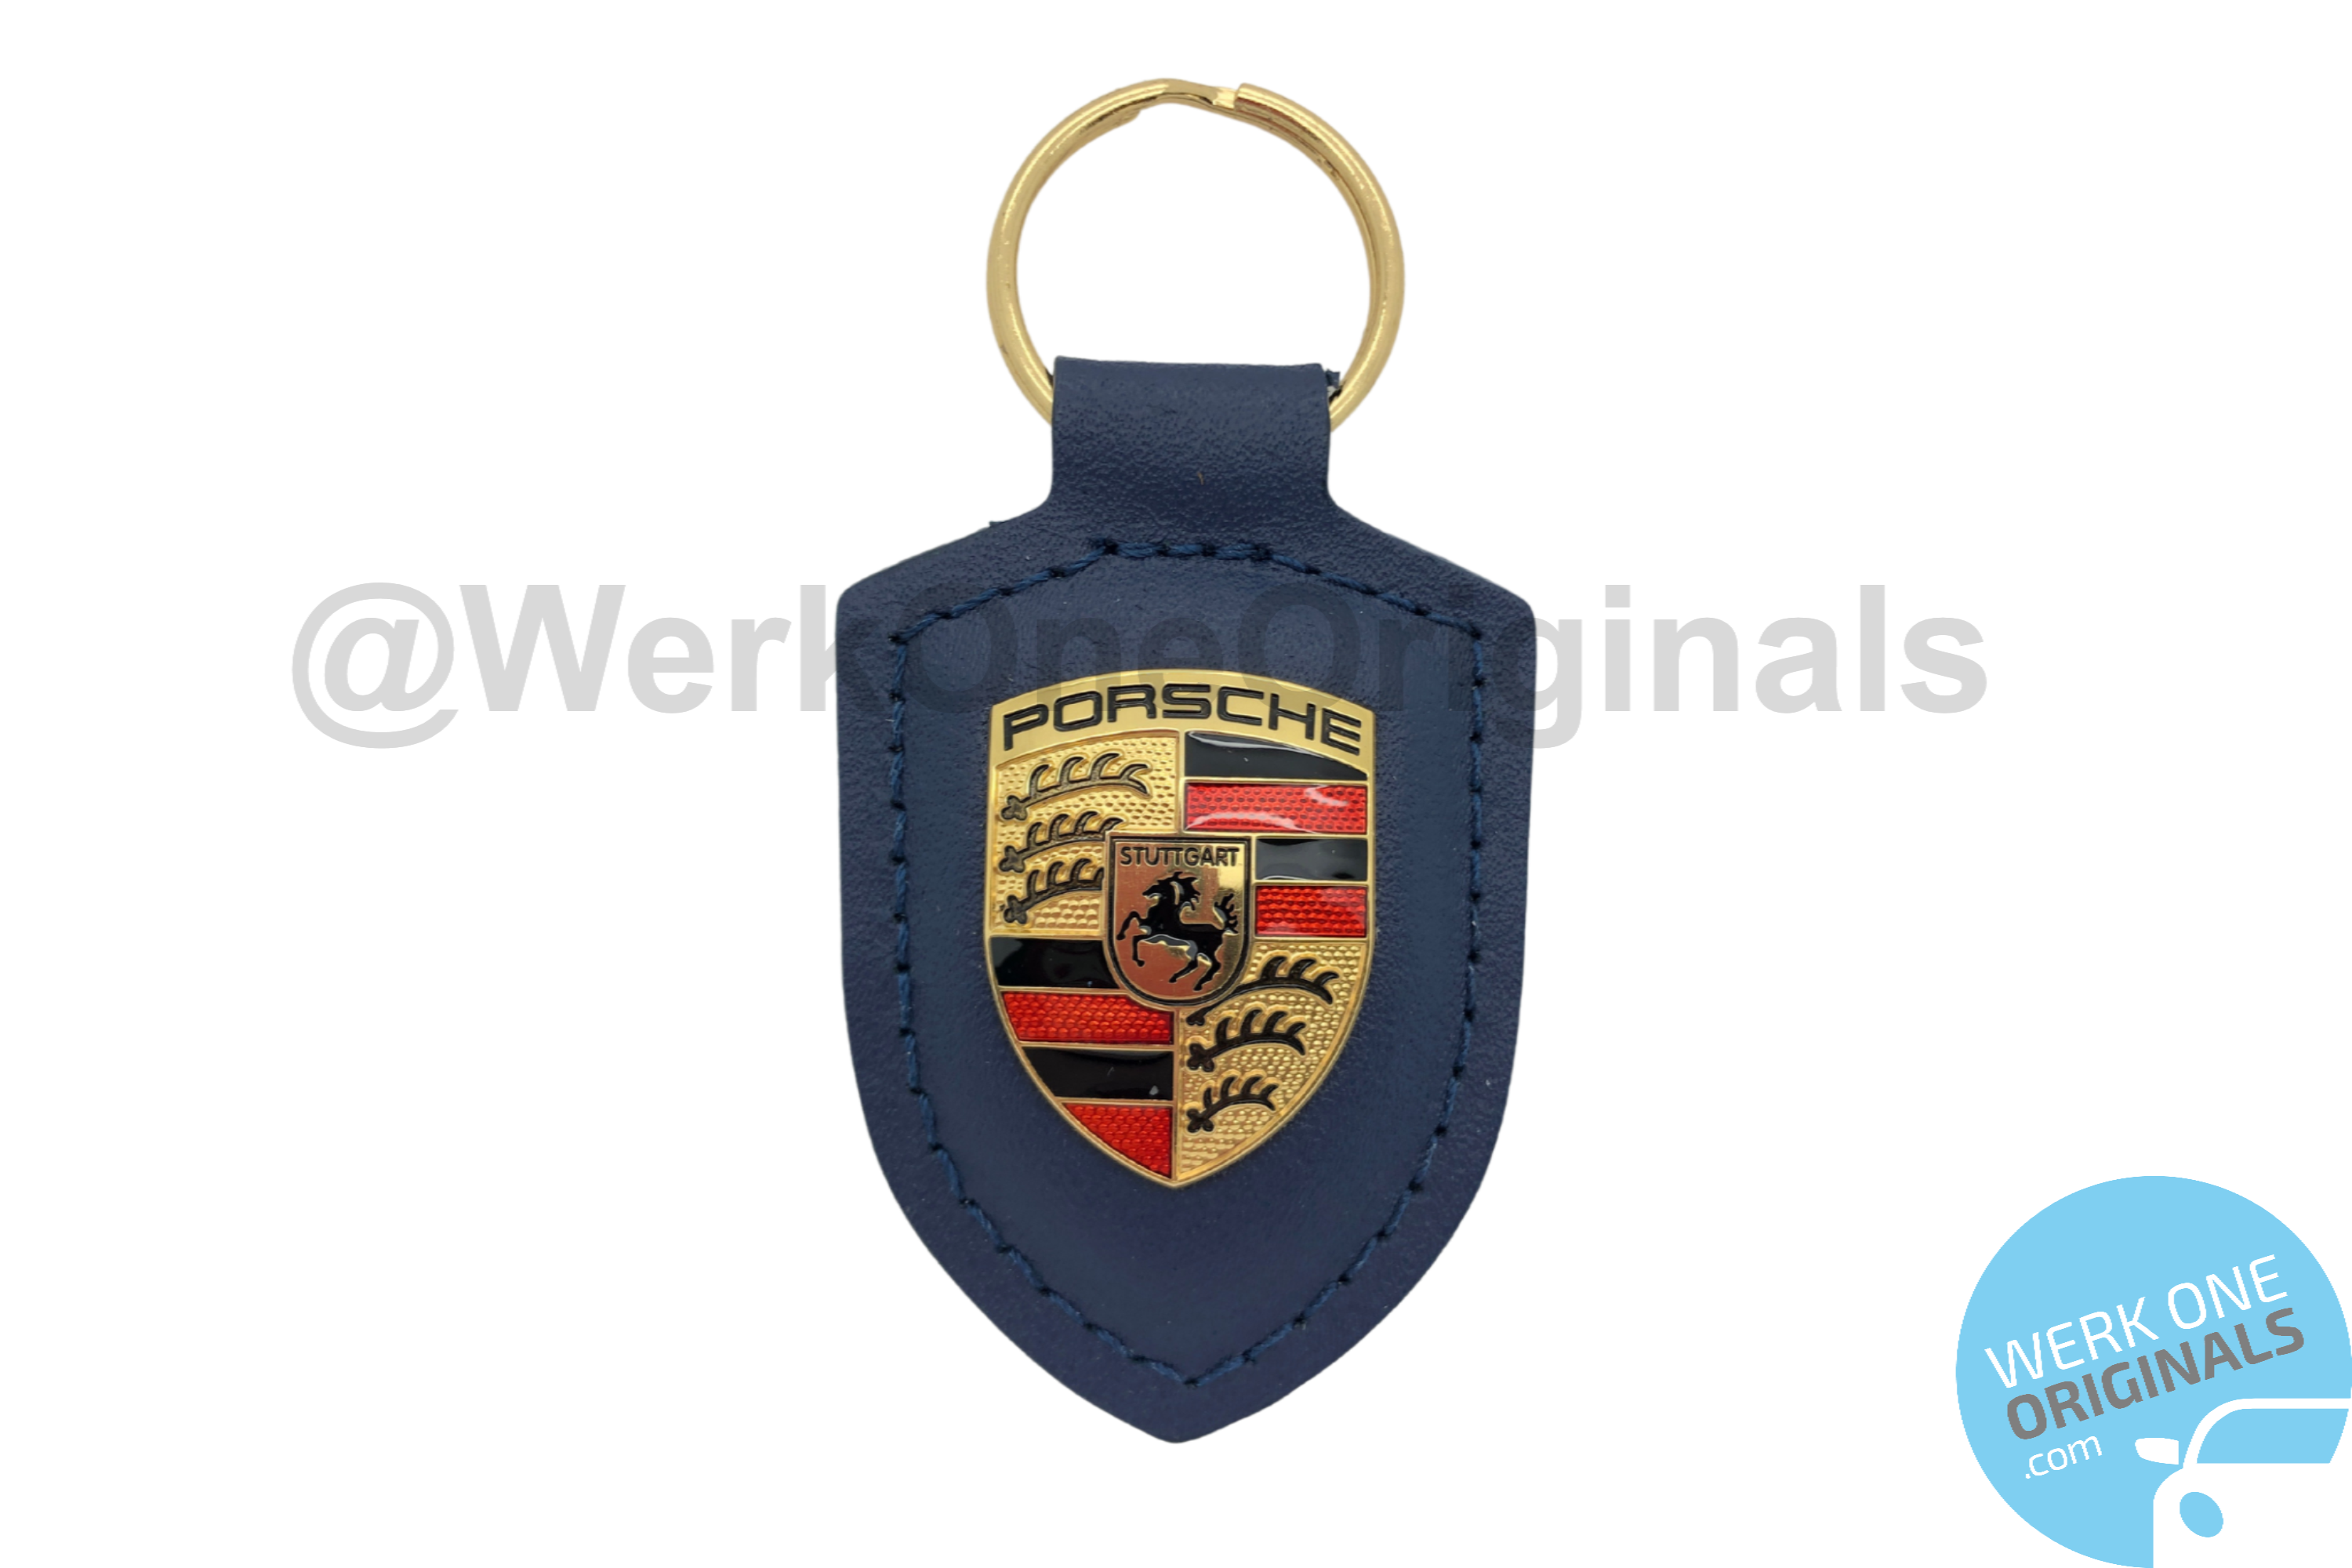 Porsche Official Crest Leather Key Fob in Navy Blue